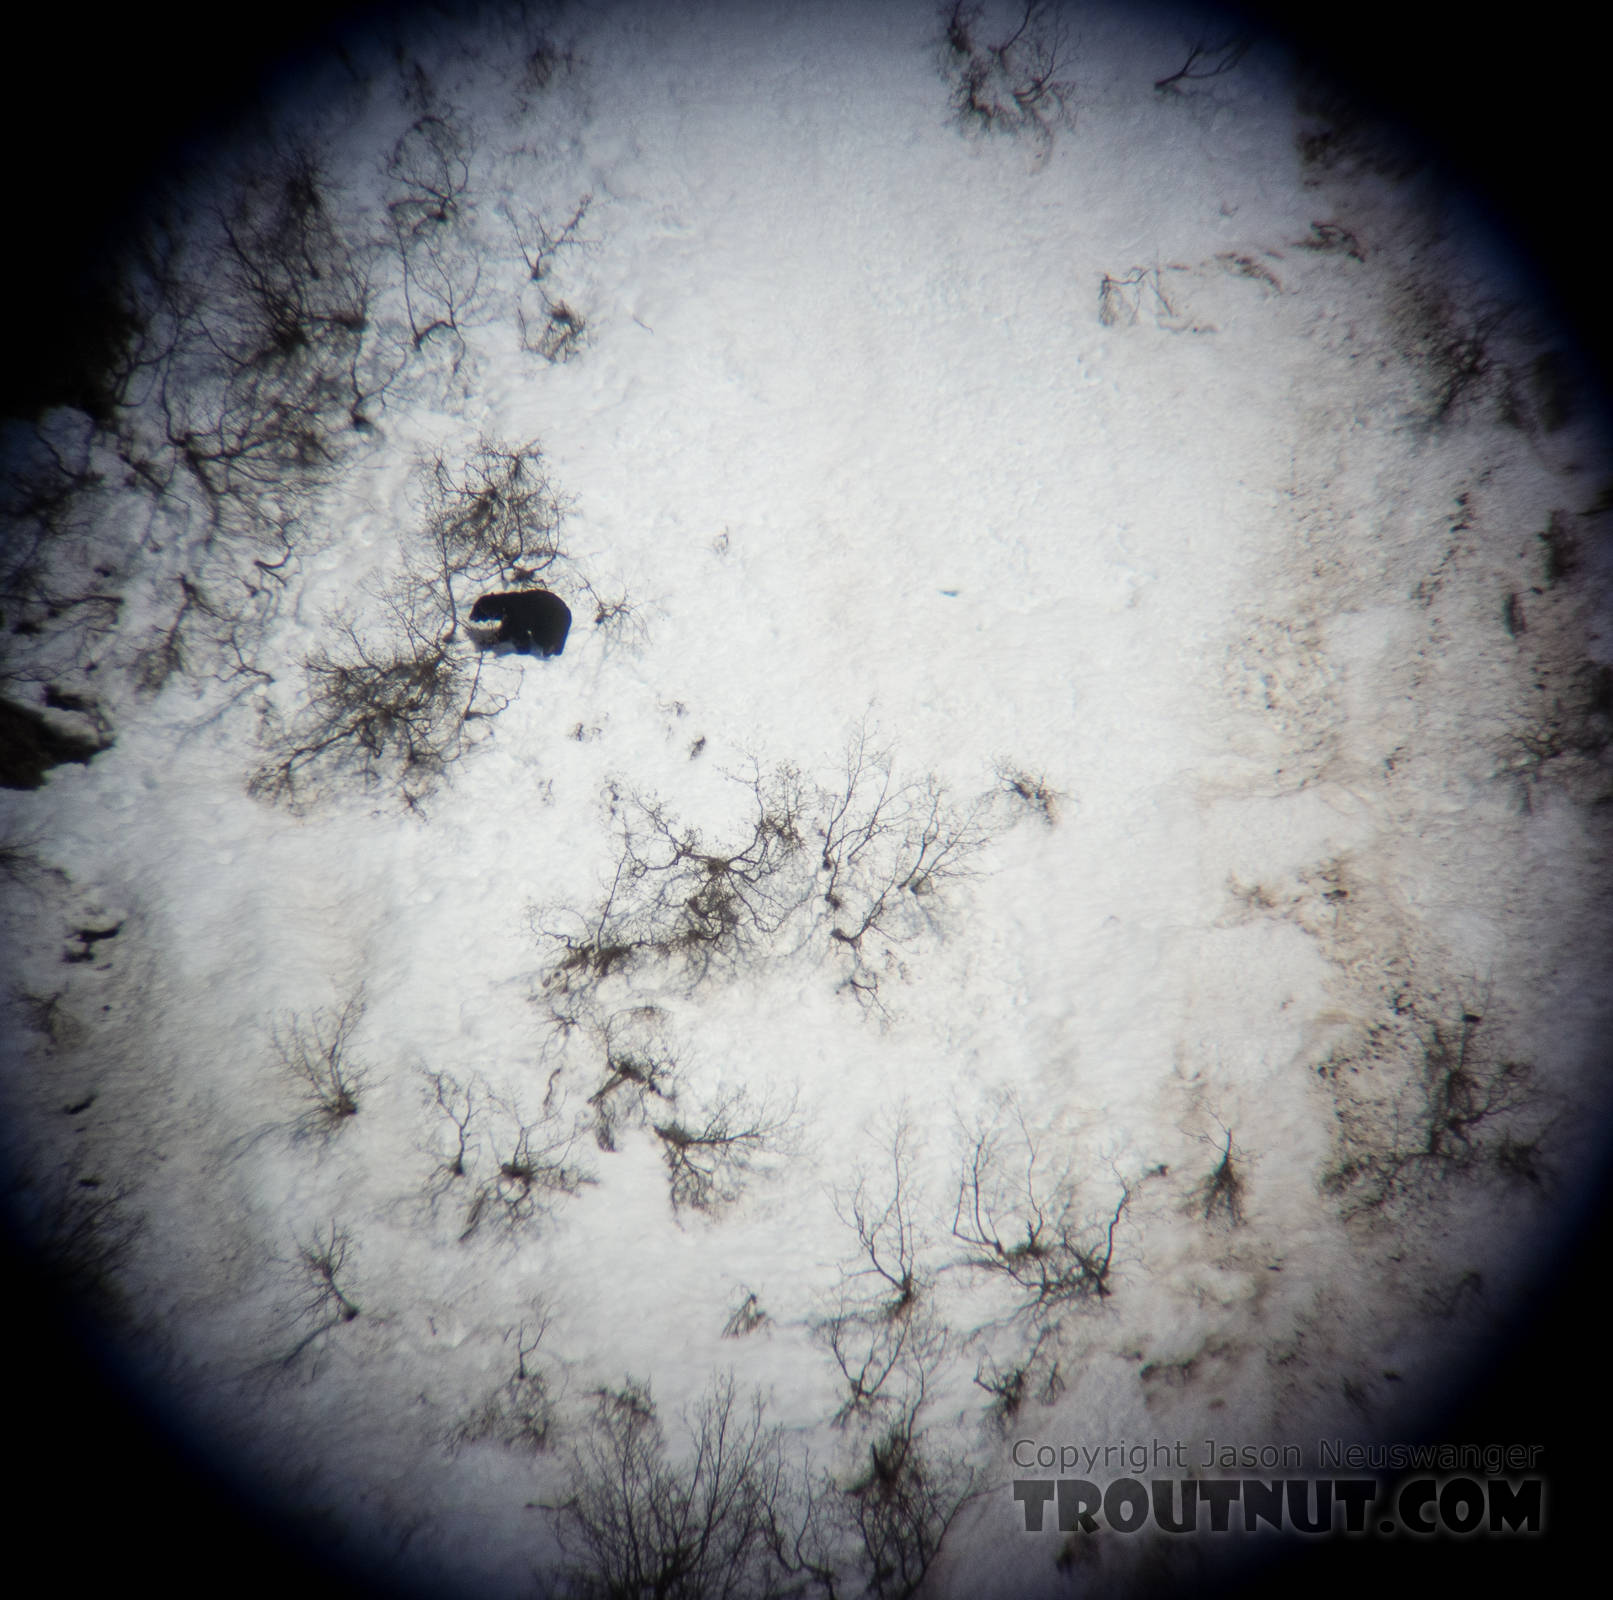 We found this bear in the spotting scope a few minutes before another group of hunters shot it. From Prince William Sound in Alaska.